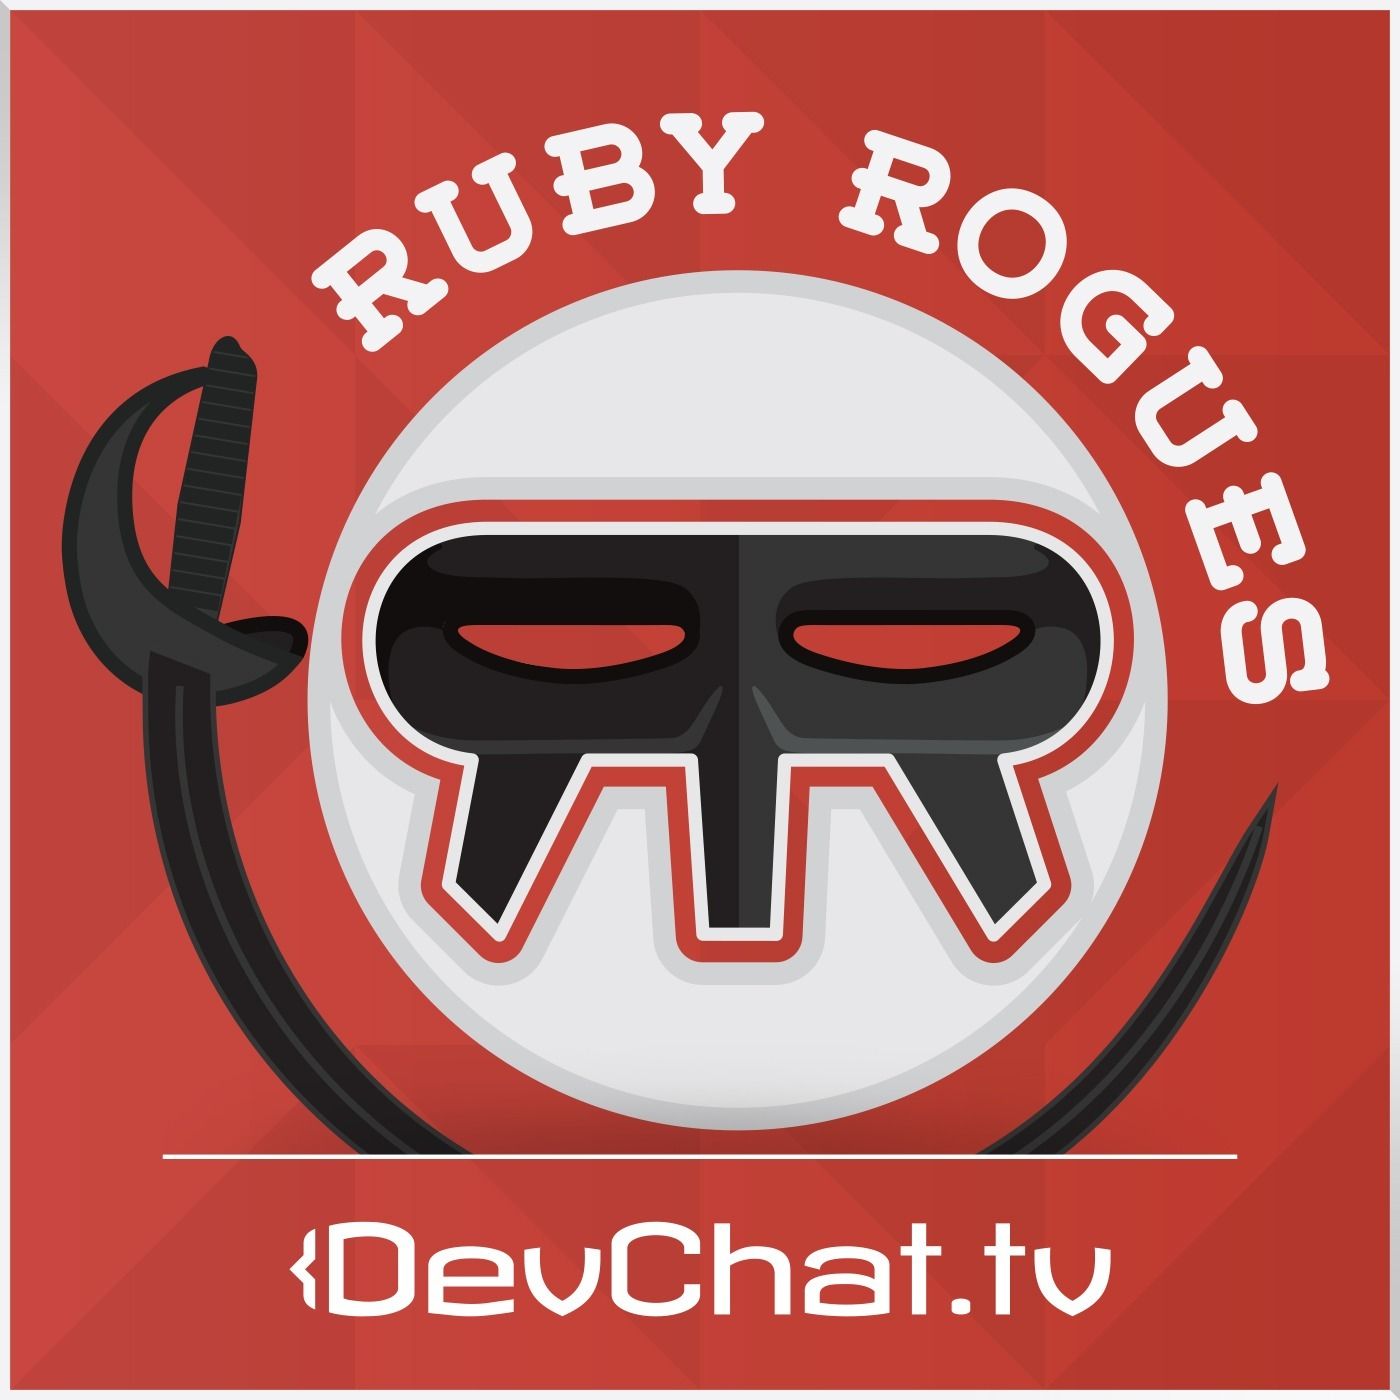 Building Skills and Connections with Nathan Bellow - RUBY 629